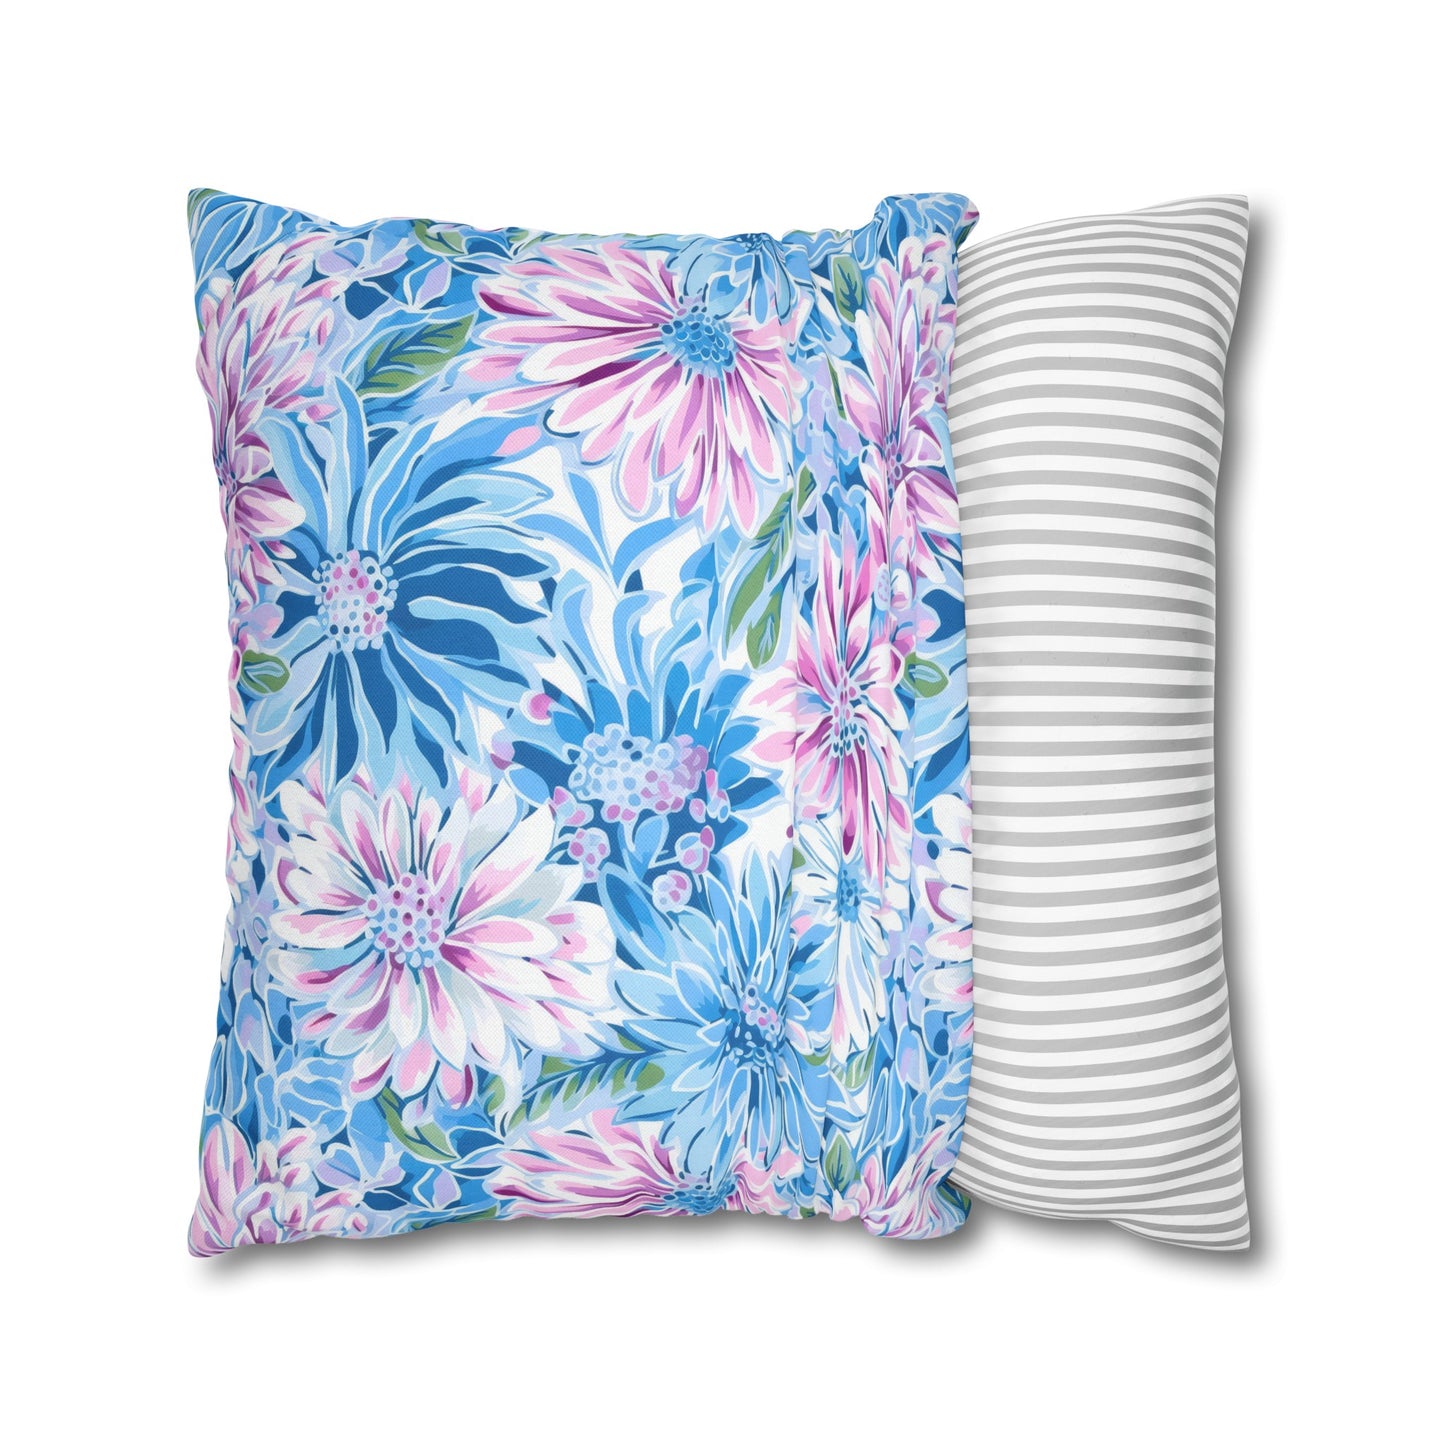 Pastel Blossom Symphony: Spring Flowers in Soft Pink and Blue Hues Spun Polyester Square Pillowcase 4 Sizes